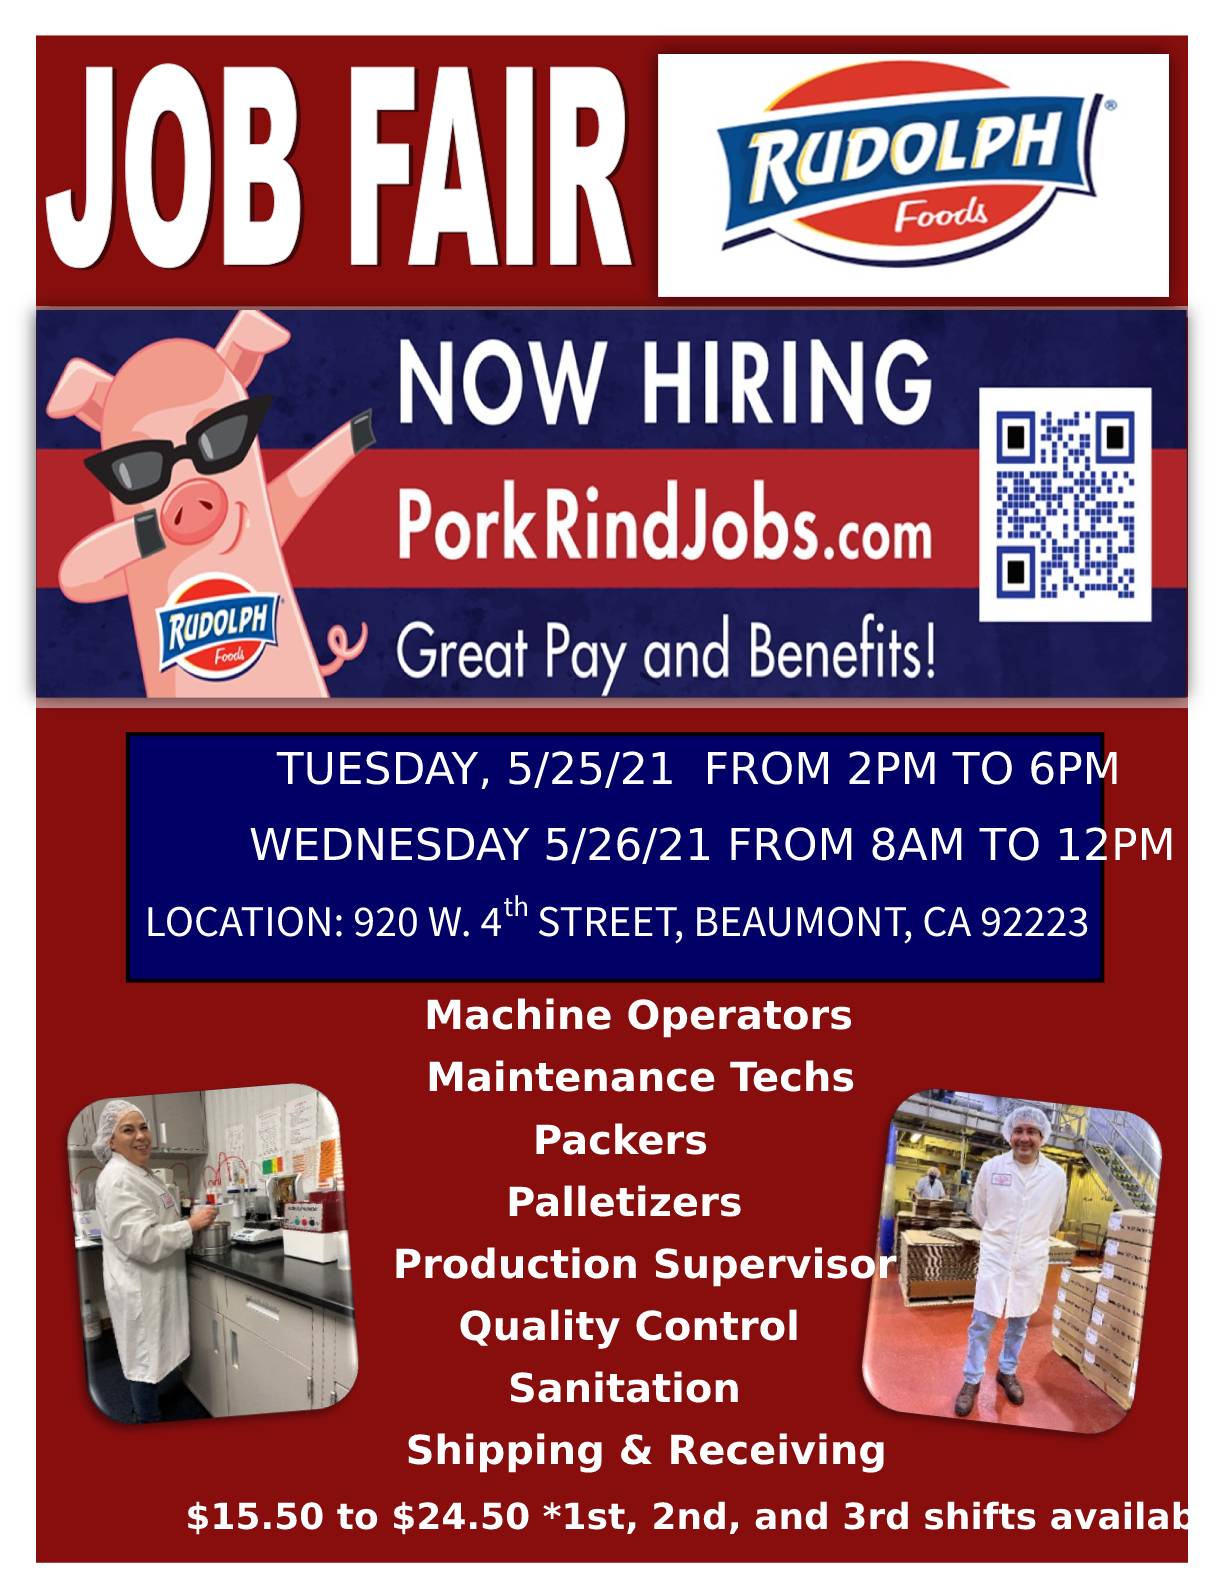 Rudolph Foods Onsite Job Fair on Tuesday, 5/25 and Wednesday, 5/26